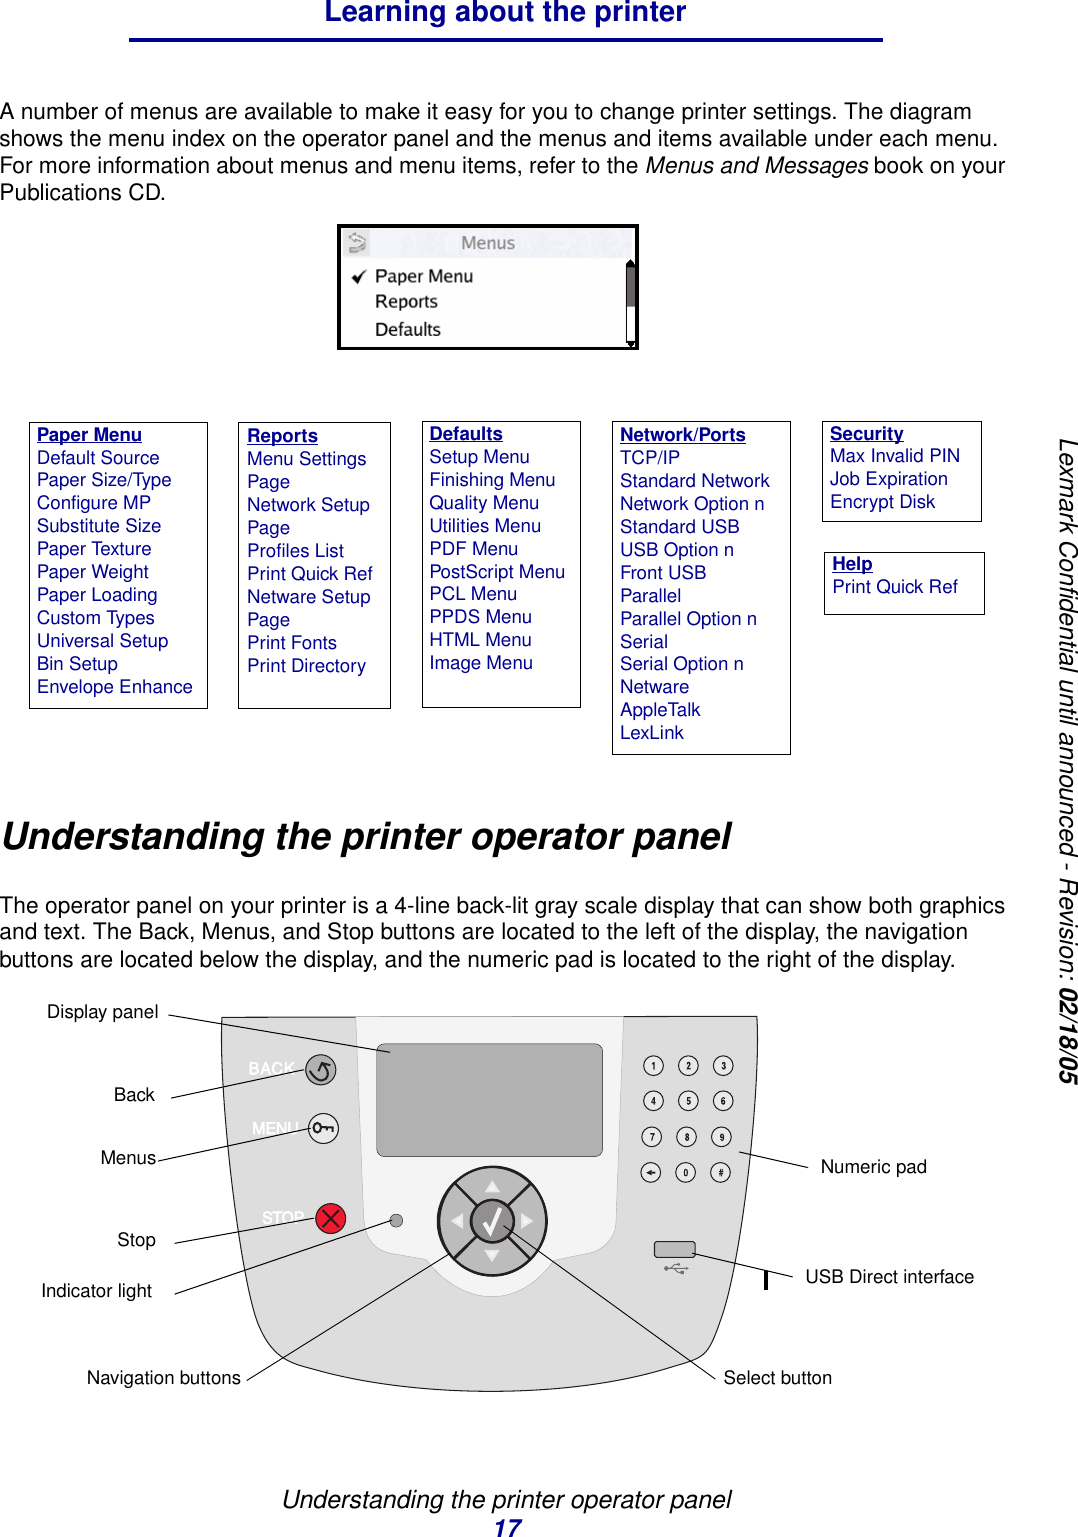 Understanding the printer operator panel17Learning about the printerLexmark Confidential until announced - Revision: 02/18/05A number of menus are available to make it easy for you to change printer settings. The diagram shows the menu index on the operator panel and the menus and items available under each menu. For more information about menus and menu items, refer to the Menus and Messages book on your Publications CD.Understanding the printer operator panelThe operator panel on your printer is a 4-line back-lit gray scale display that can show both graphics and text. The Back, Menus, and Stop buttons are located to the left of the display, the navigation buttons are located below the display, and the numeric pad is located to the right of the display.Paper MenuDefault SourcePaper Size/TypeConfigure MPSubstitute SizePaper TexturePaper WeightPaper LoadingCustom TypesUniversal SetupBin SetupEnvelope EnhanceReportsMenu Settings PageNetwork Setup PageProfiles ListPrint Quick RefNetware Setup PagePrint Fonts Print Directory DefaultsSetup MenuFinishing MenuQuality MenuUtilities MenuPDF MenuPostScript MenuPCL MenuPPDS MenuHTML MenuImage MenuSecurityMax Invalid PINJob ExpirationEncrypt DiskNetwork/PortsTCP/IPStandard NetworkNetwork Option nStandard USBUSB Option nFront USBParallelParallel Option nSerialSerial Option nNetwareAppleTalkLexLinkHelpPrint Quick Ref BackMenusStopNavigation buttonsNumeric padDisplay panelIndicator light USB Direct interfaceSelect button